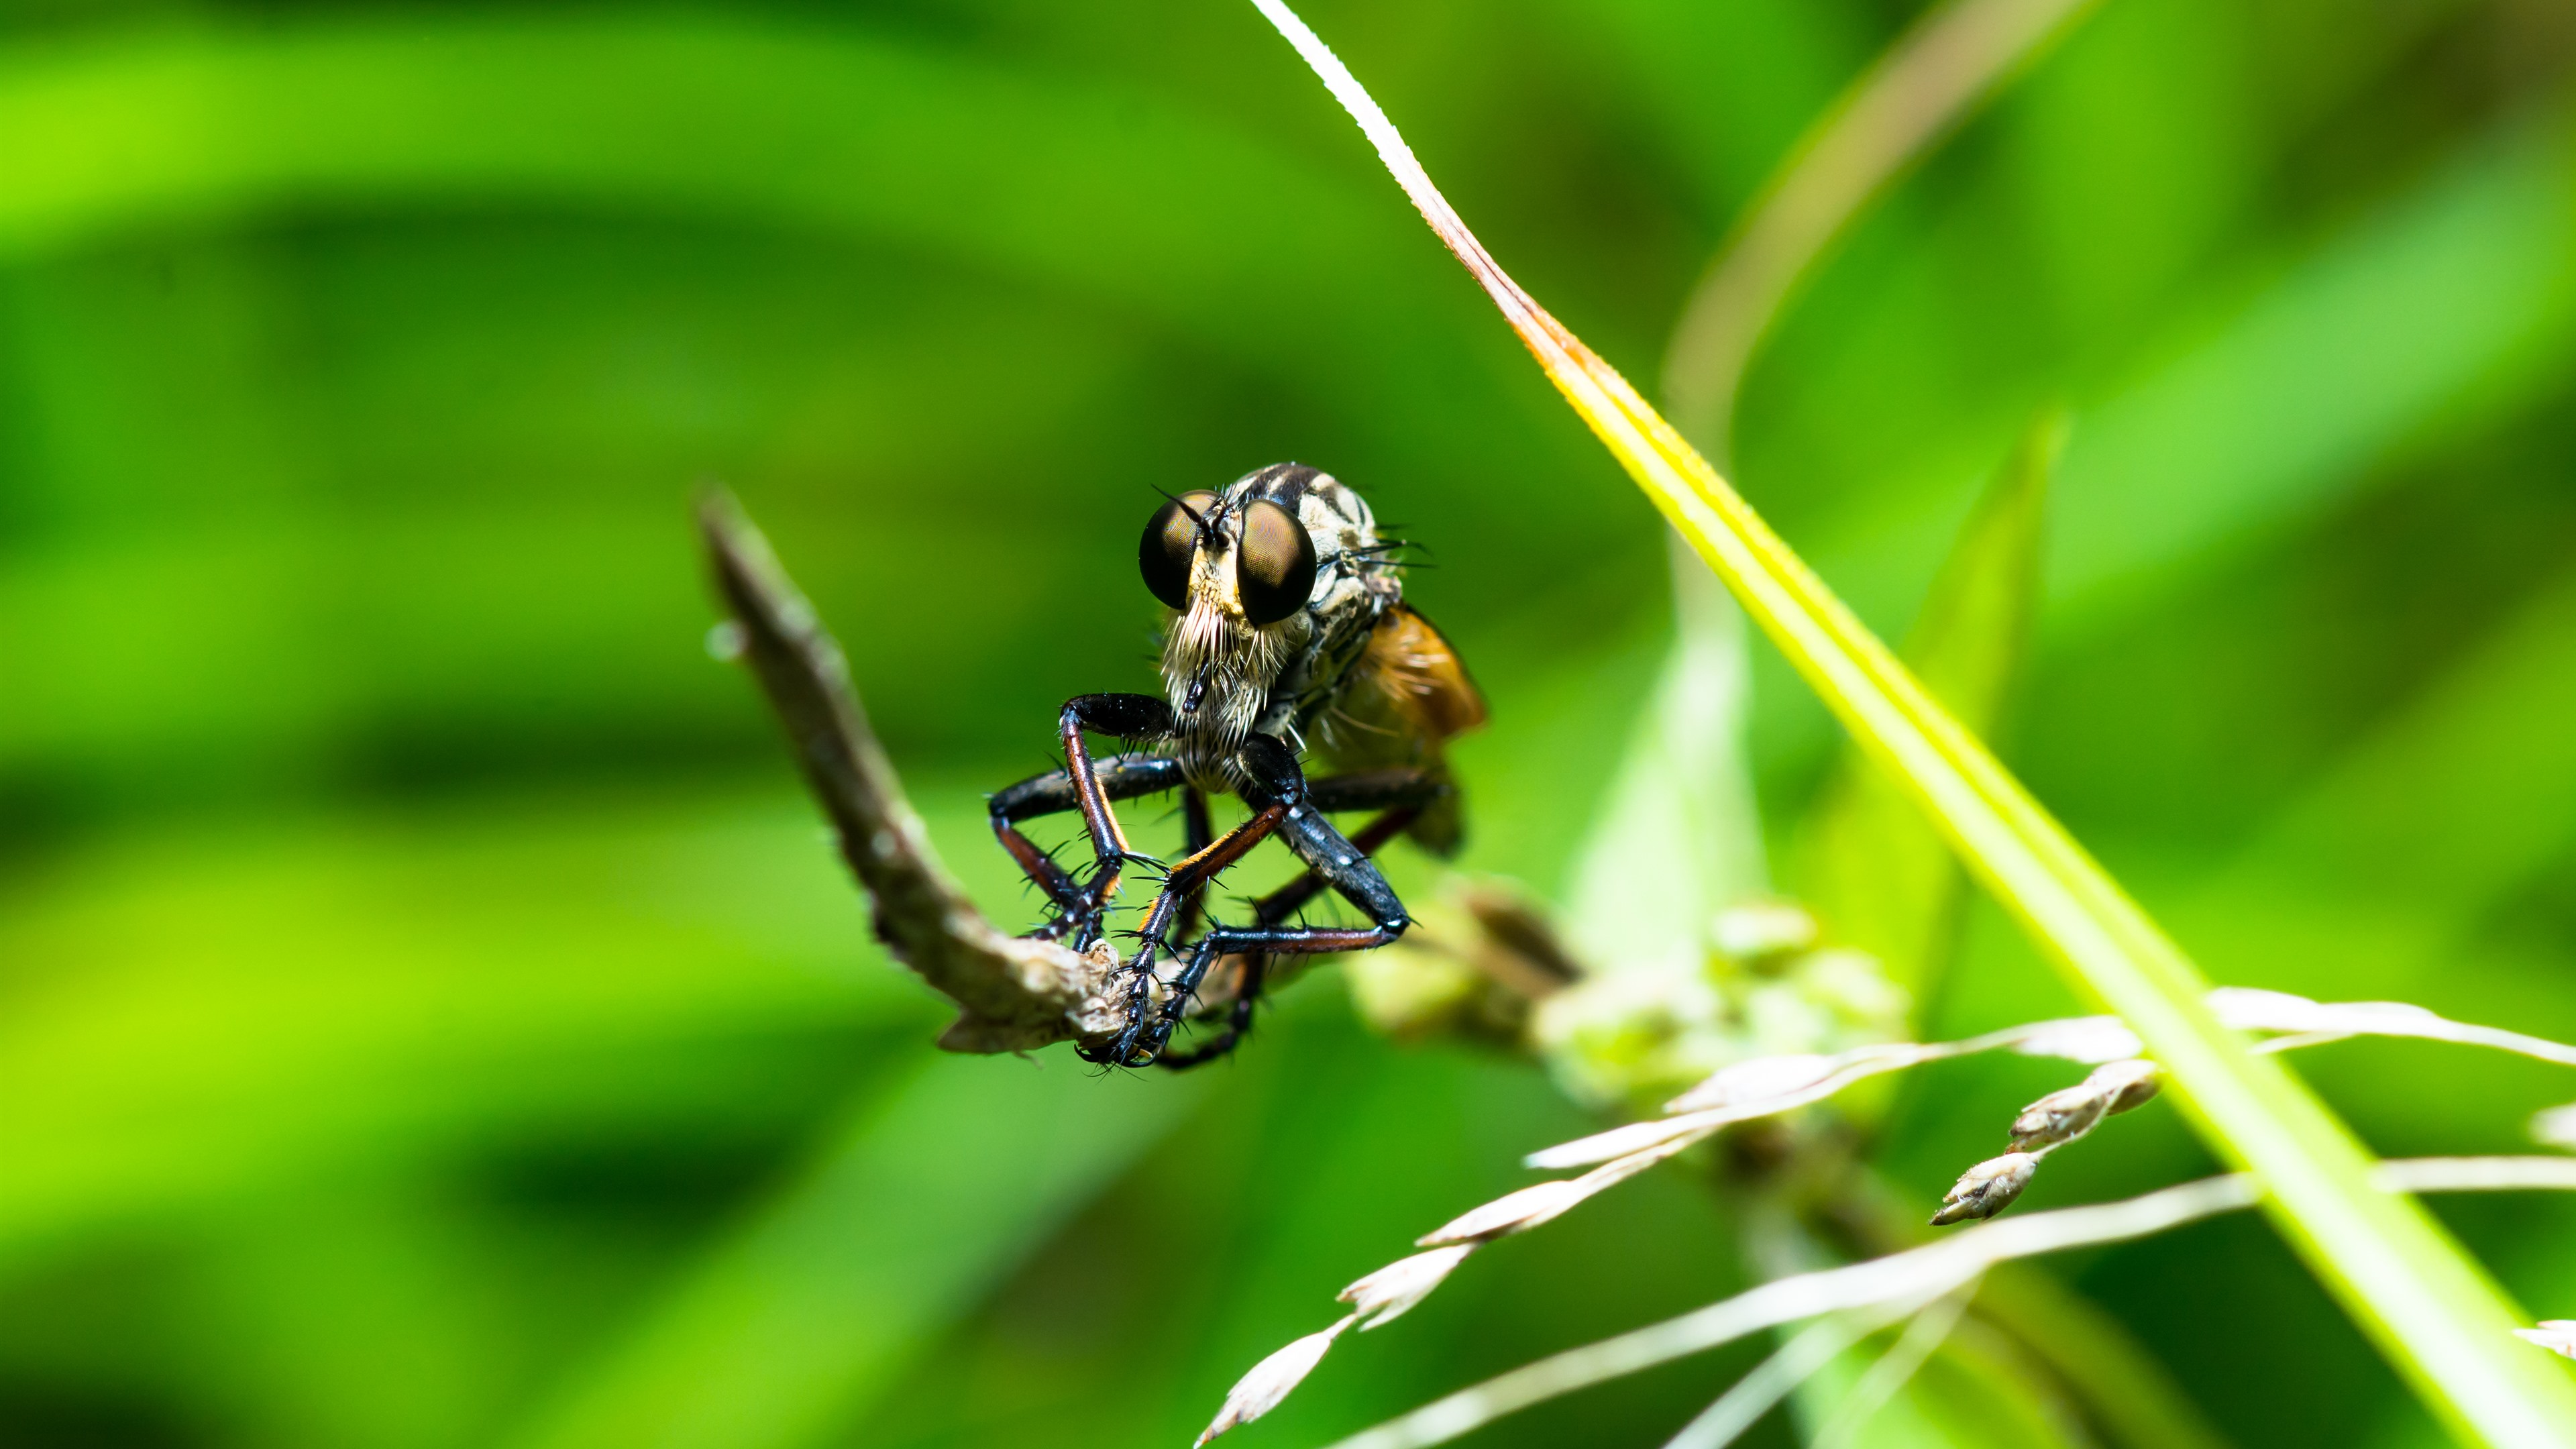 Wallpaper Spider, insect, grass 3840x2160 UHD 4K Picture, Image